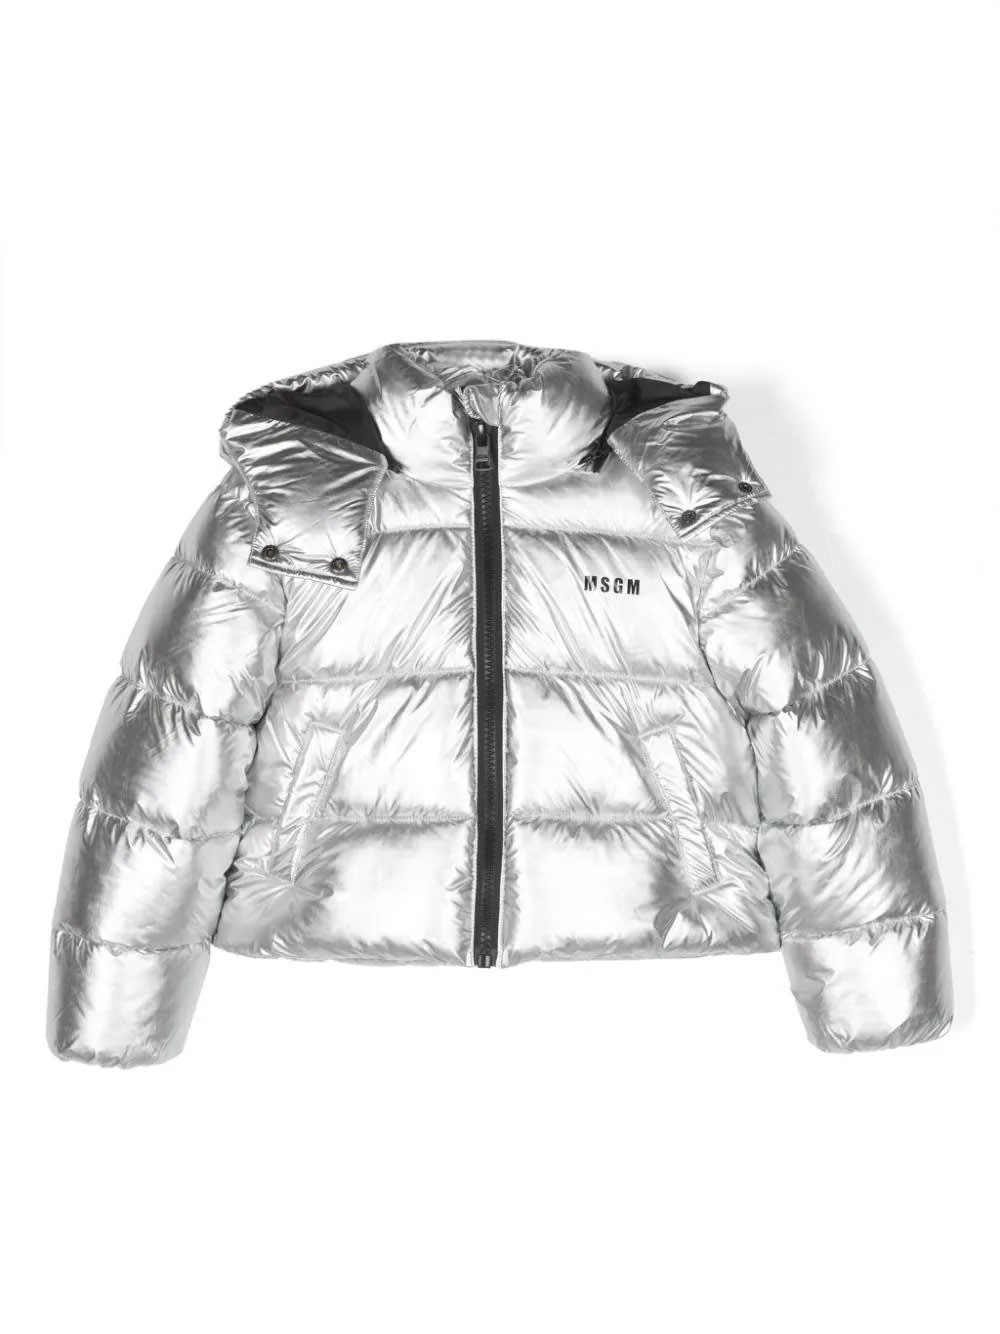 MSGM SILVER METALLIC PUFFER JACKET WITH LOGO AND STAR